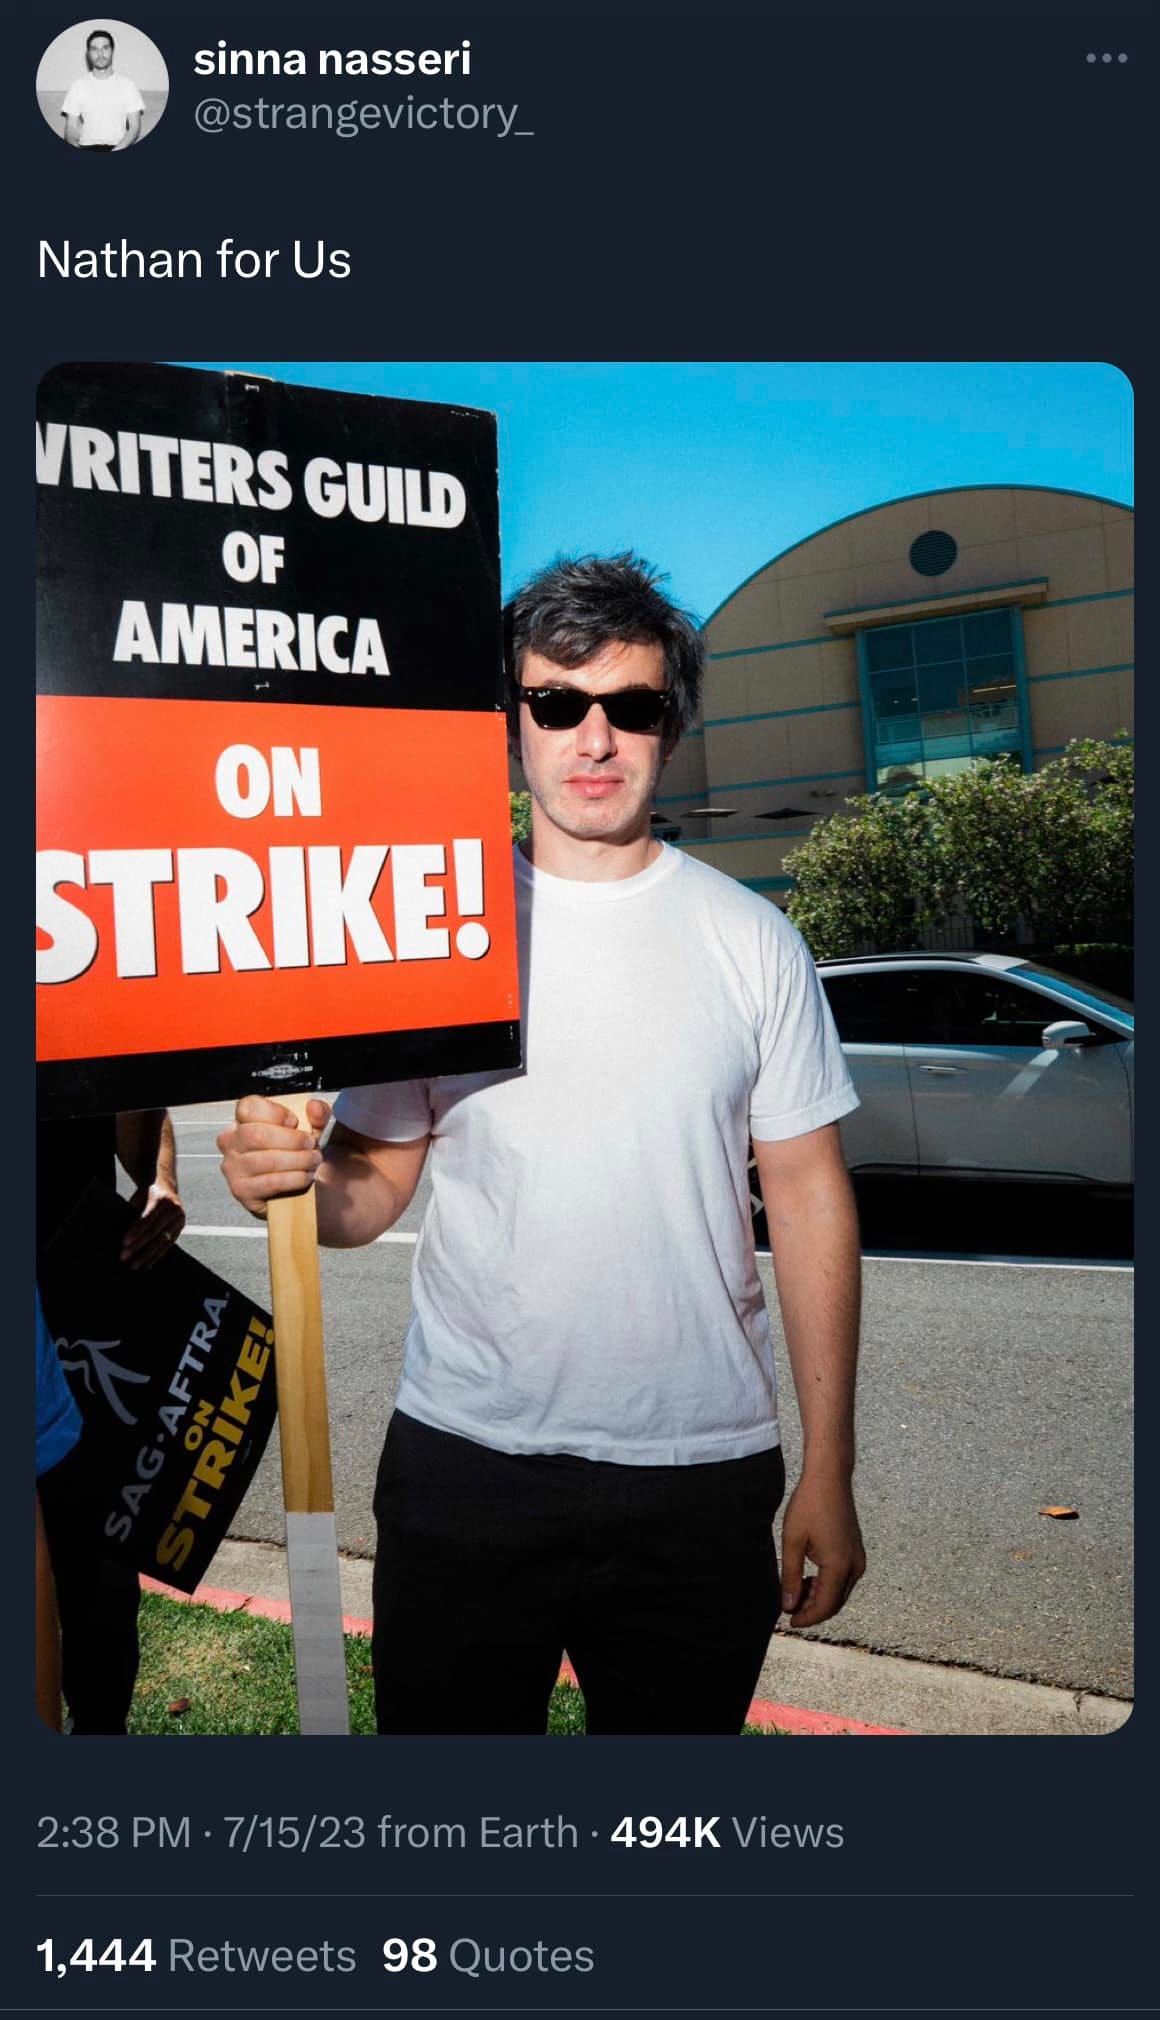 May be an image of 2 people and text that says 'sinna nasseri @strangevictory_ Nathan for Us VRITERS GUILD OF AMERICA ON STRIKE! 2:38 PM 7/15/23 from Earth 494K Views 1,444 Retweets 98 Quotes'